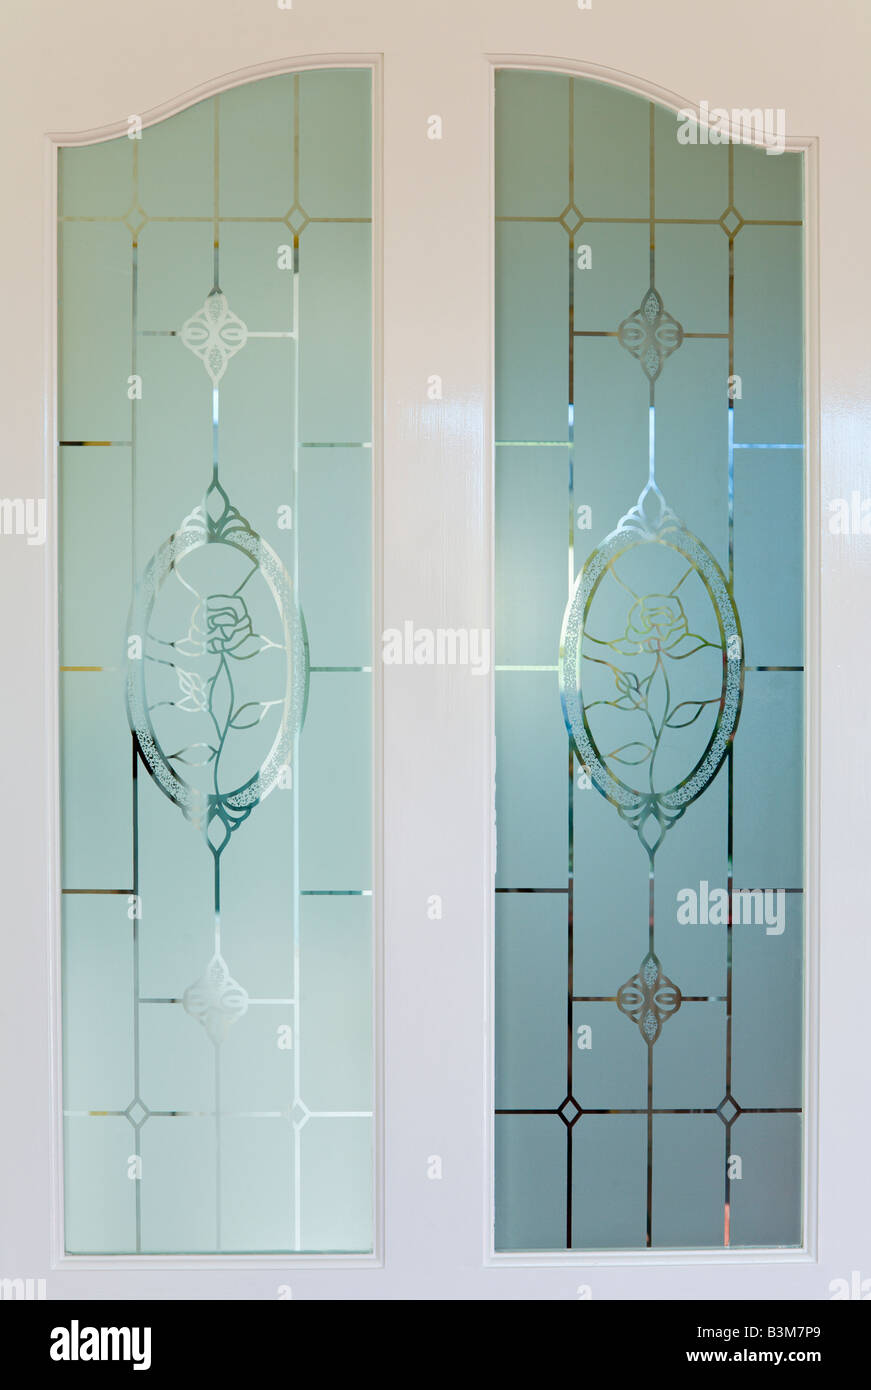 Half glazed internal door with etched glass pattern Stock Photo